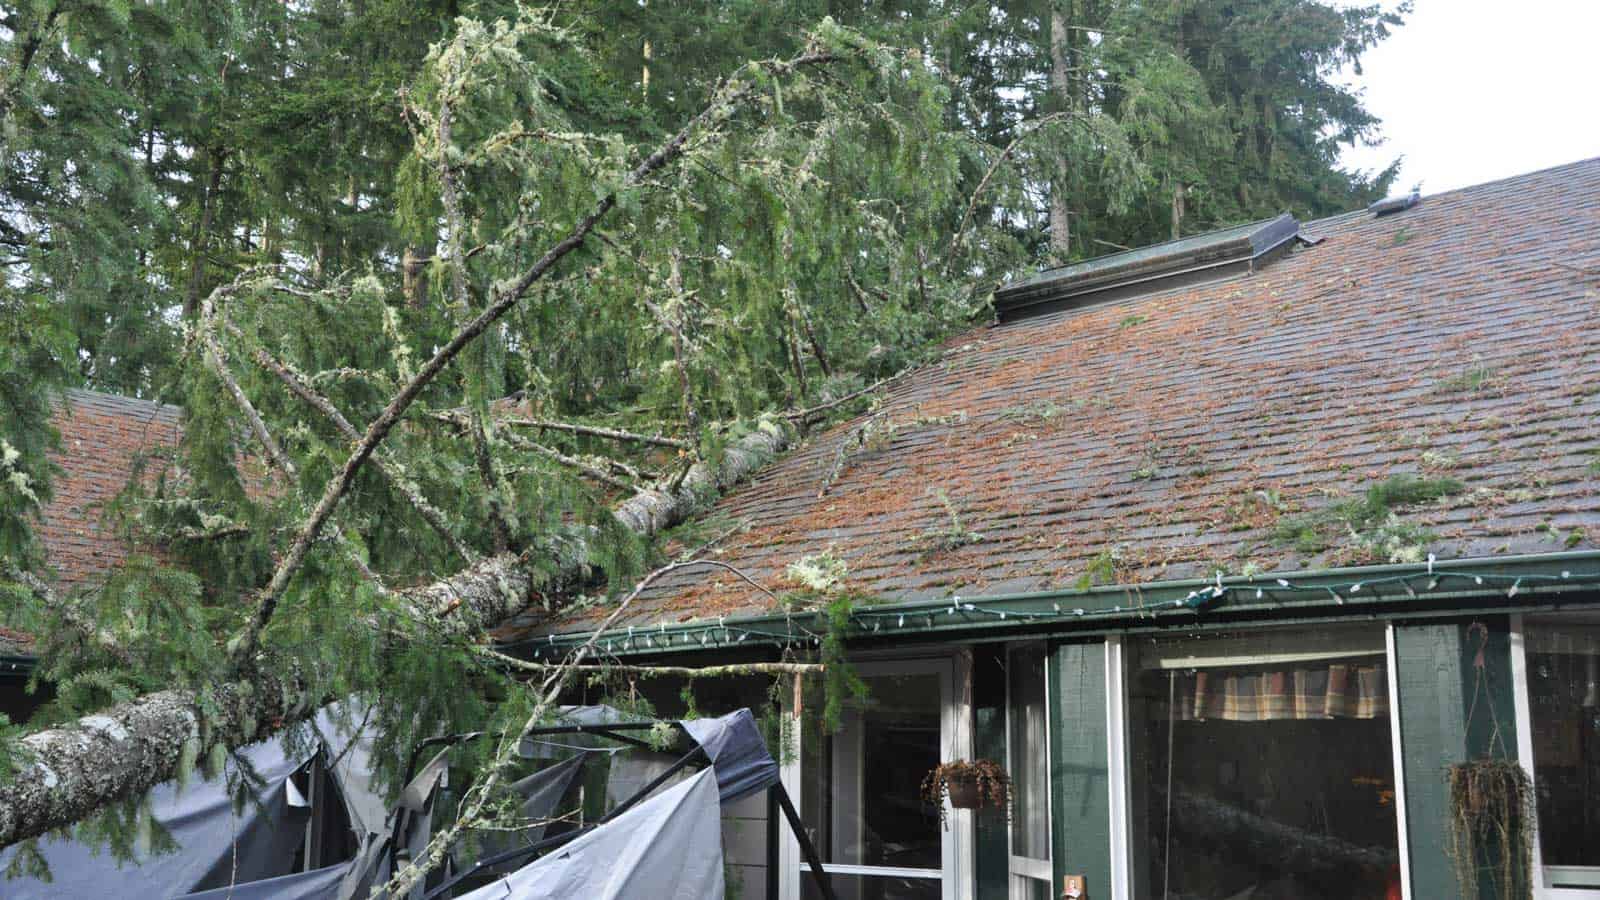 Roof damage like this might be avoidable. Here’s what you should never do to your roof!